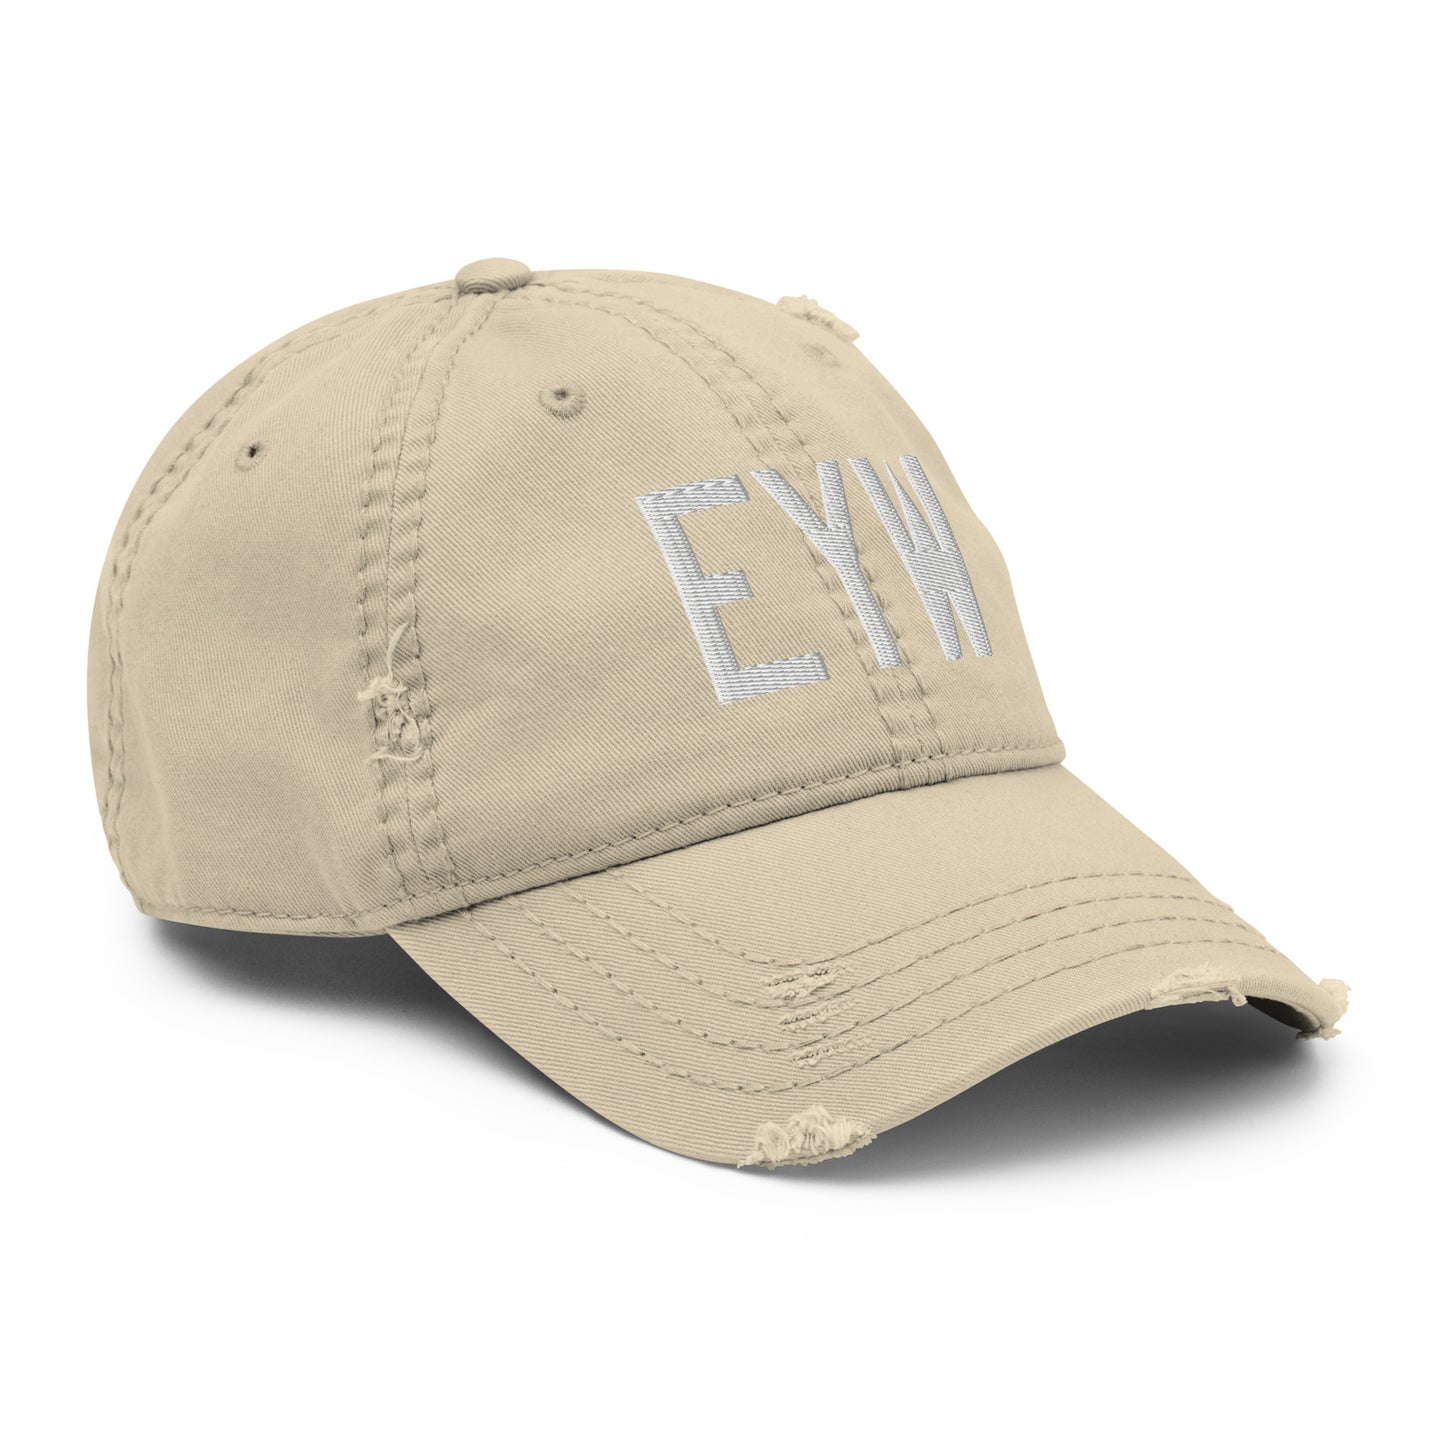 Airport Code Distressed Hat - White • EYW Key West • YHM Designs - Image 20